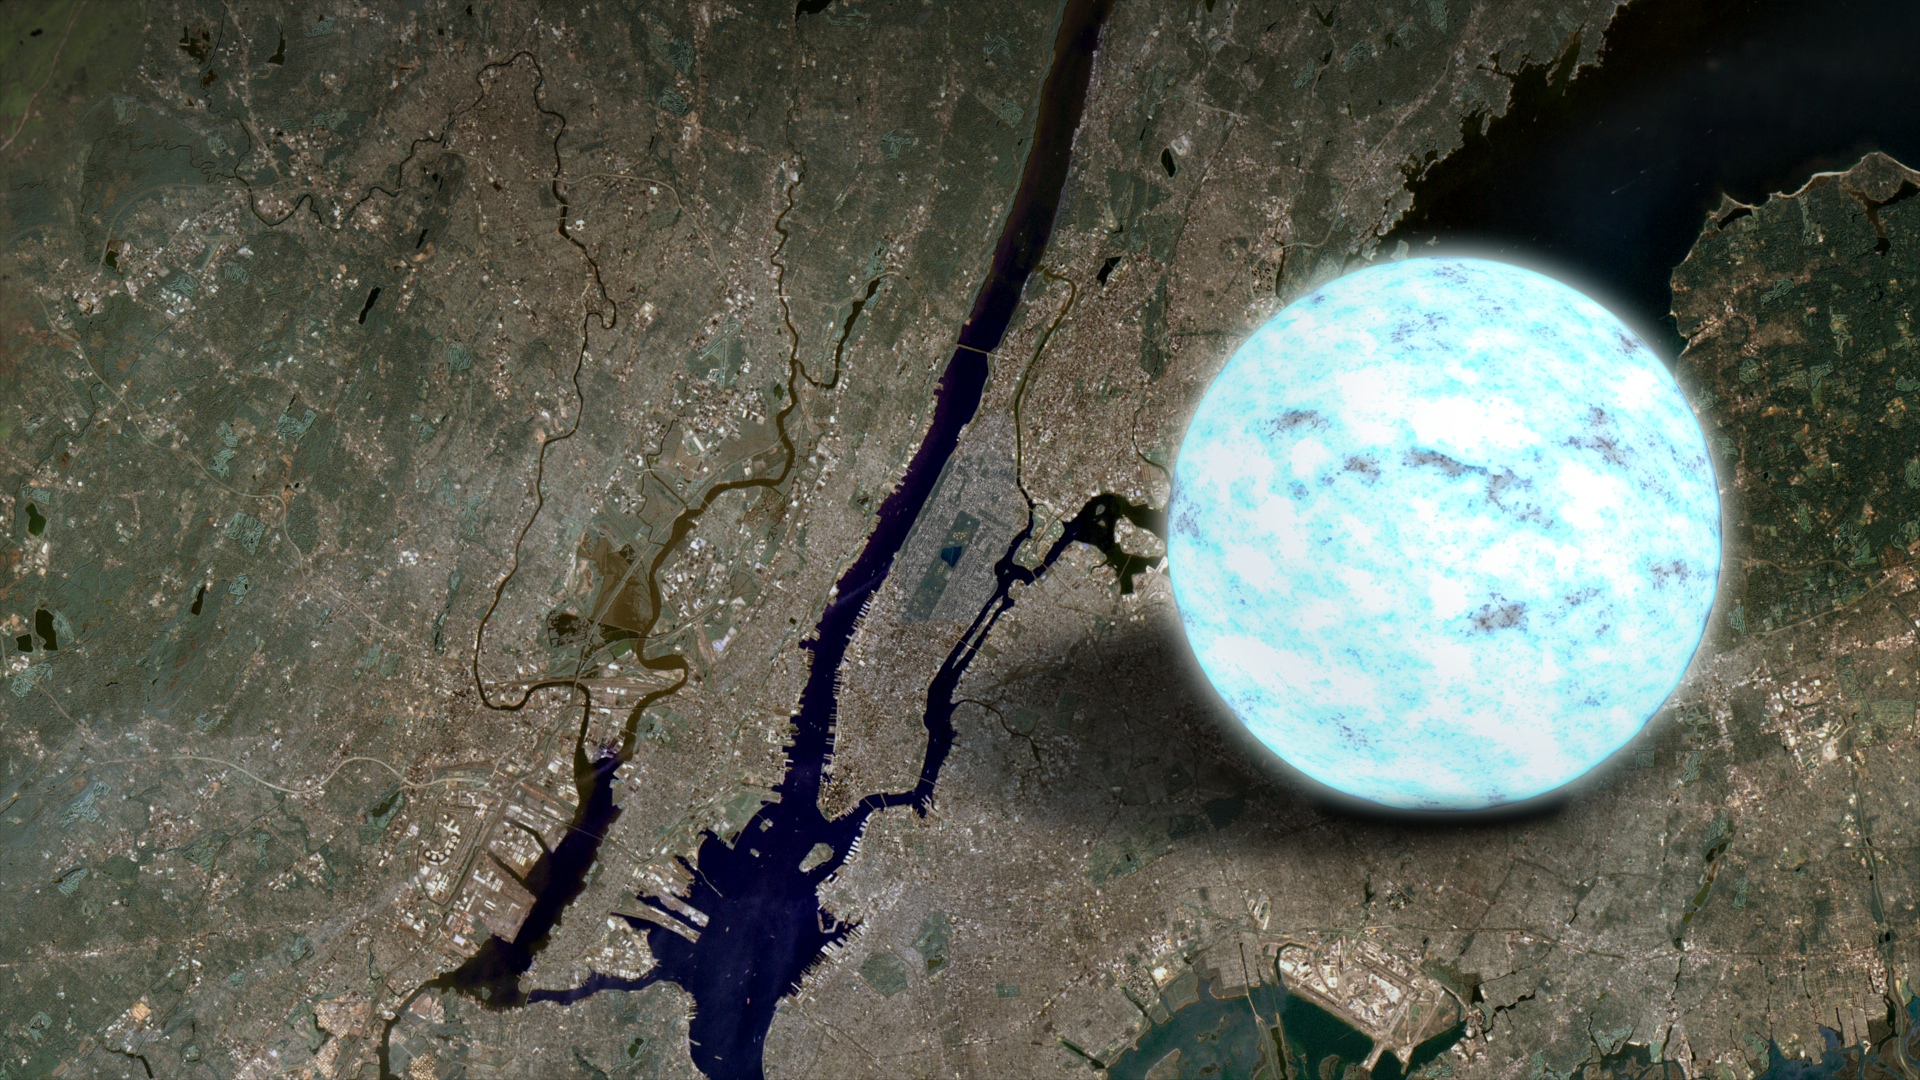 Sweet! Neutron stars are like cosmic chocolates, with hard or soft shells and centers thumbnail